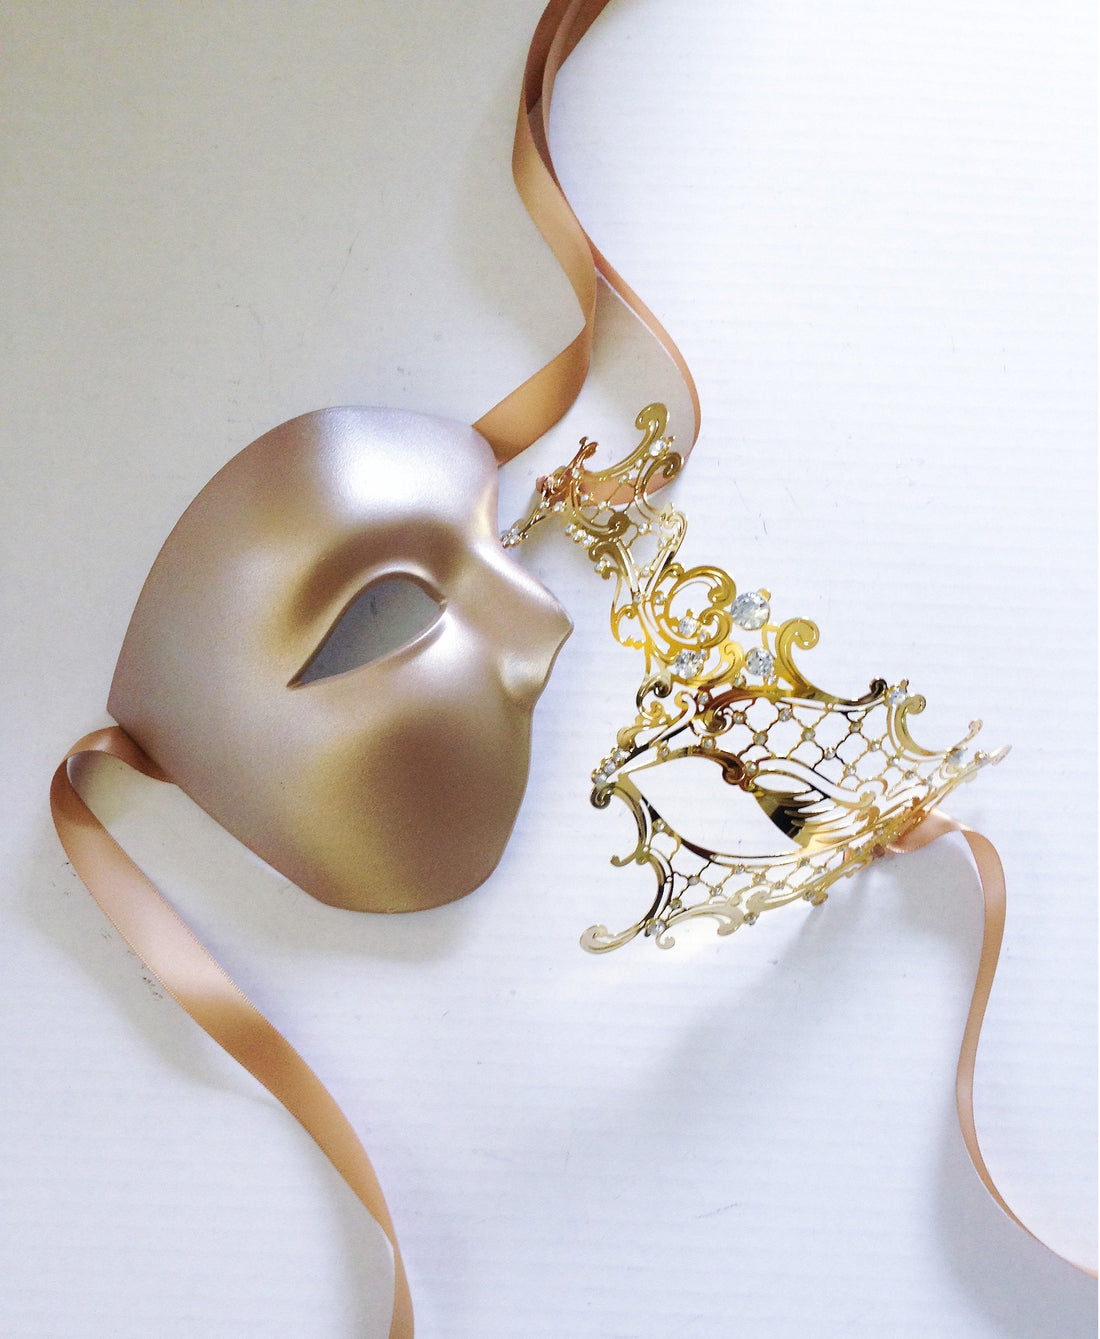 Couples masquerade mask set in Venetian phantom style in gold for sale.